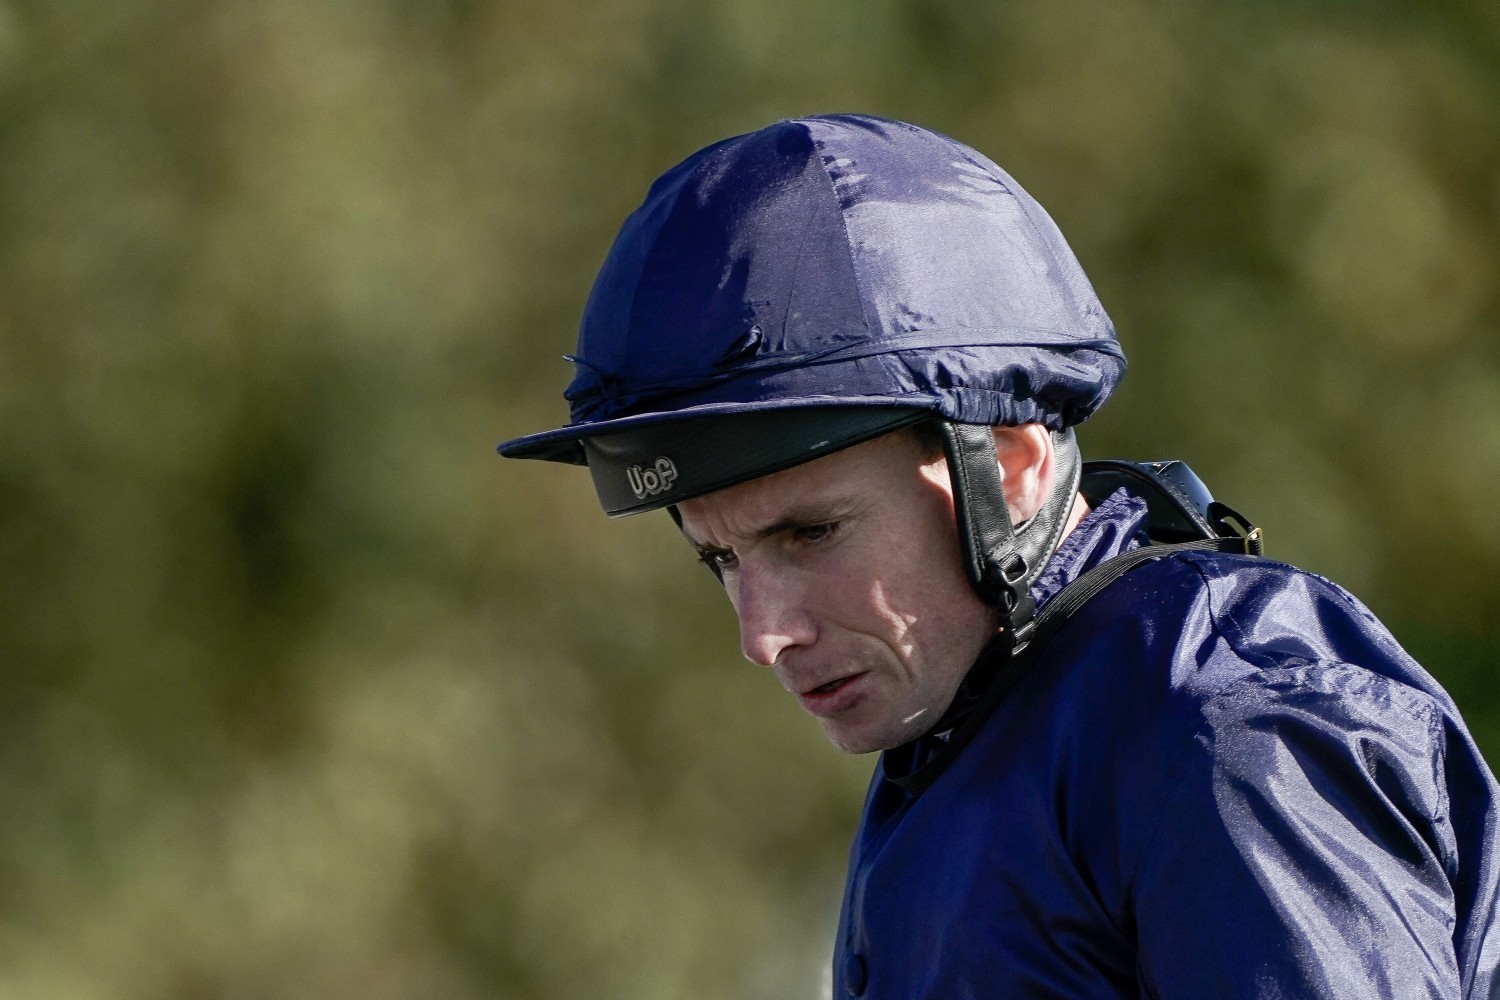 Ryan Moore has been very bullish about City Of Troy